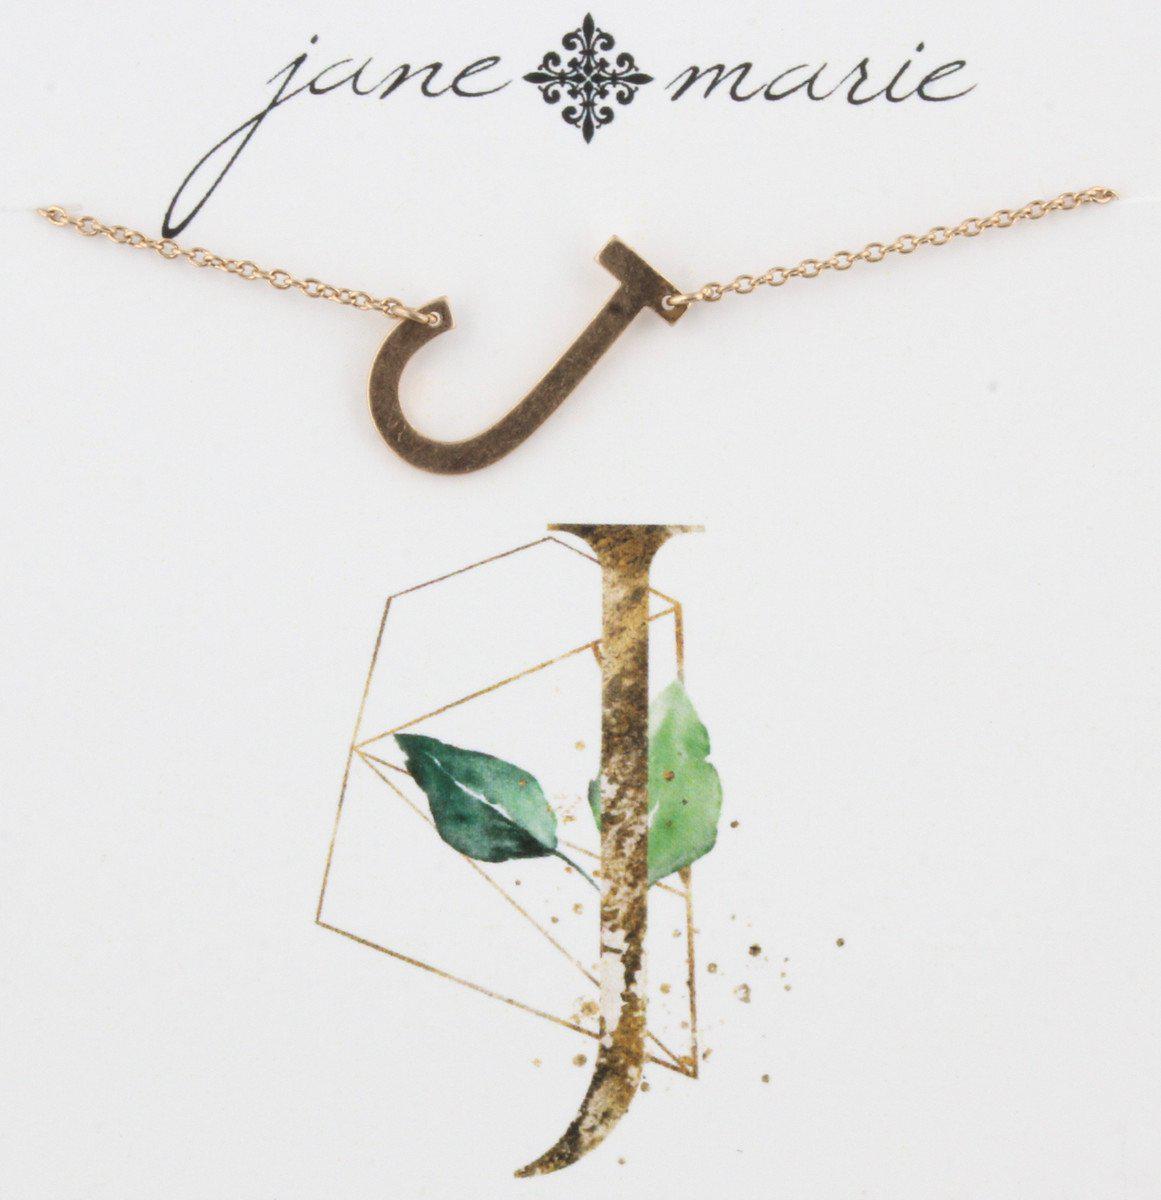 Jane Marie You-nique Initial Necklace - BeautyOfASite - Central Illinois Gifts, Fashion & Beauty Boutique